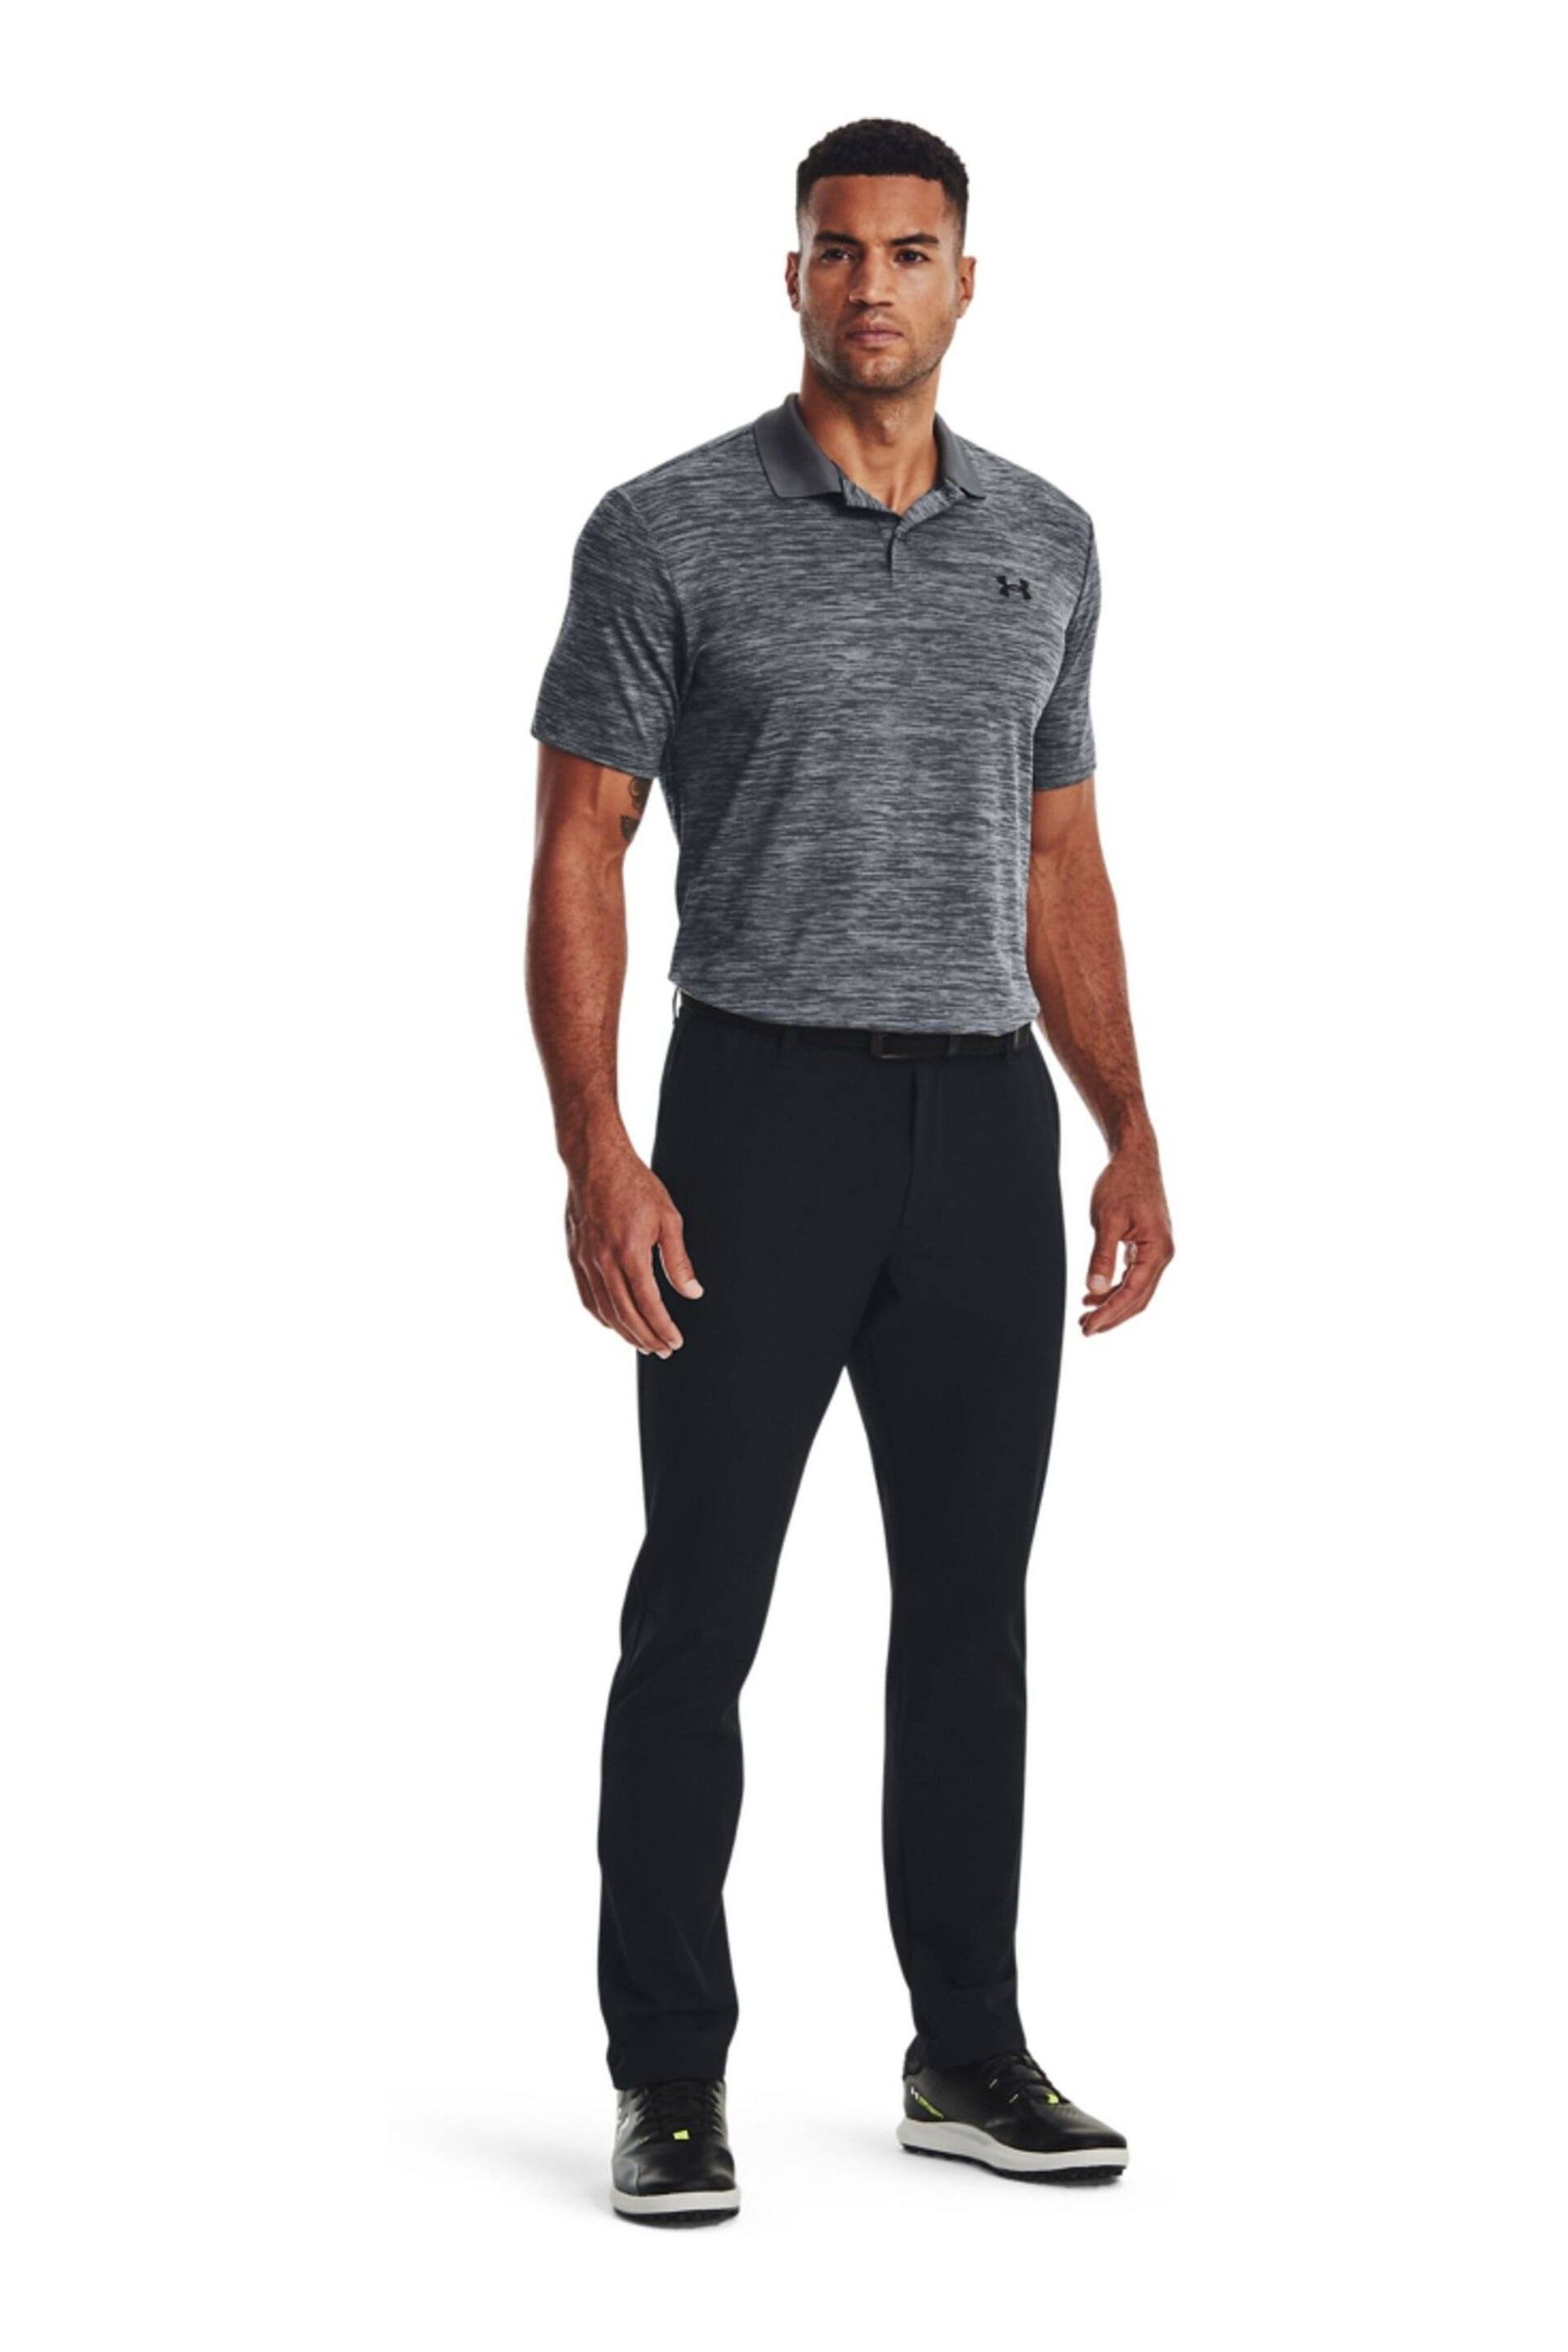 Under Armour Grey/Black Golf Performance Polo Shirt - Image 6 of 6